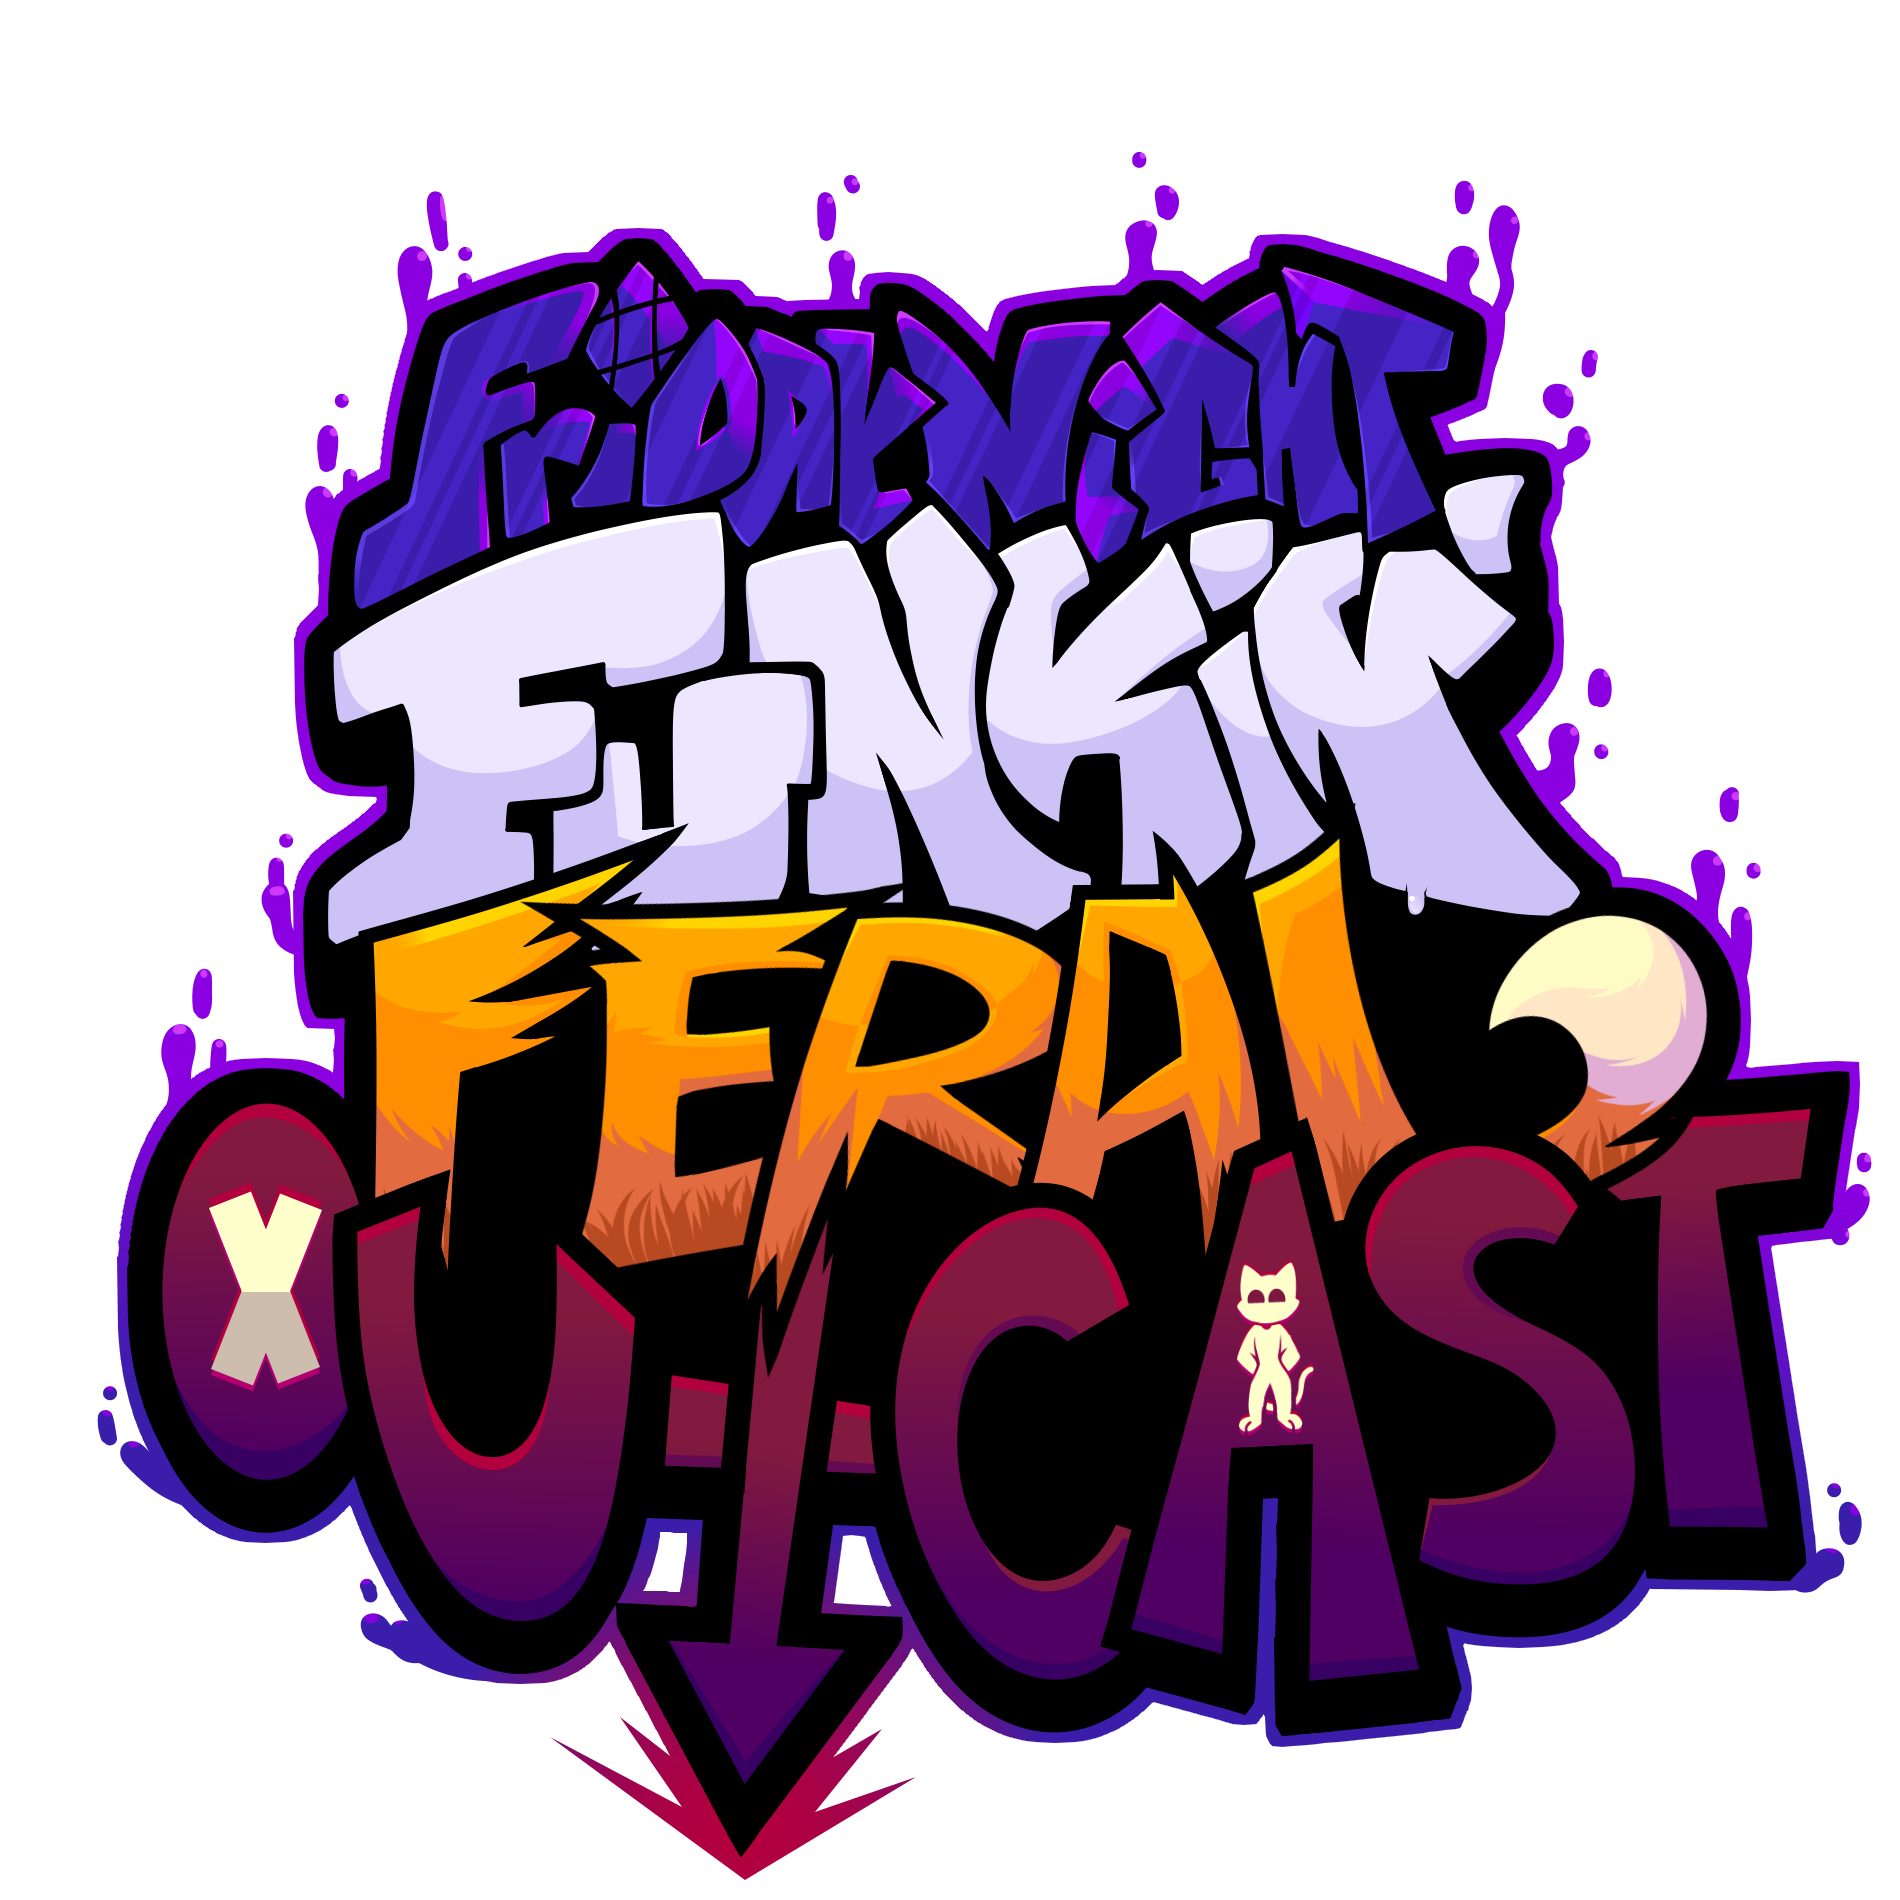 FNF FERAL OUTCASTS